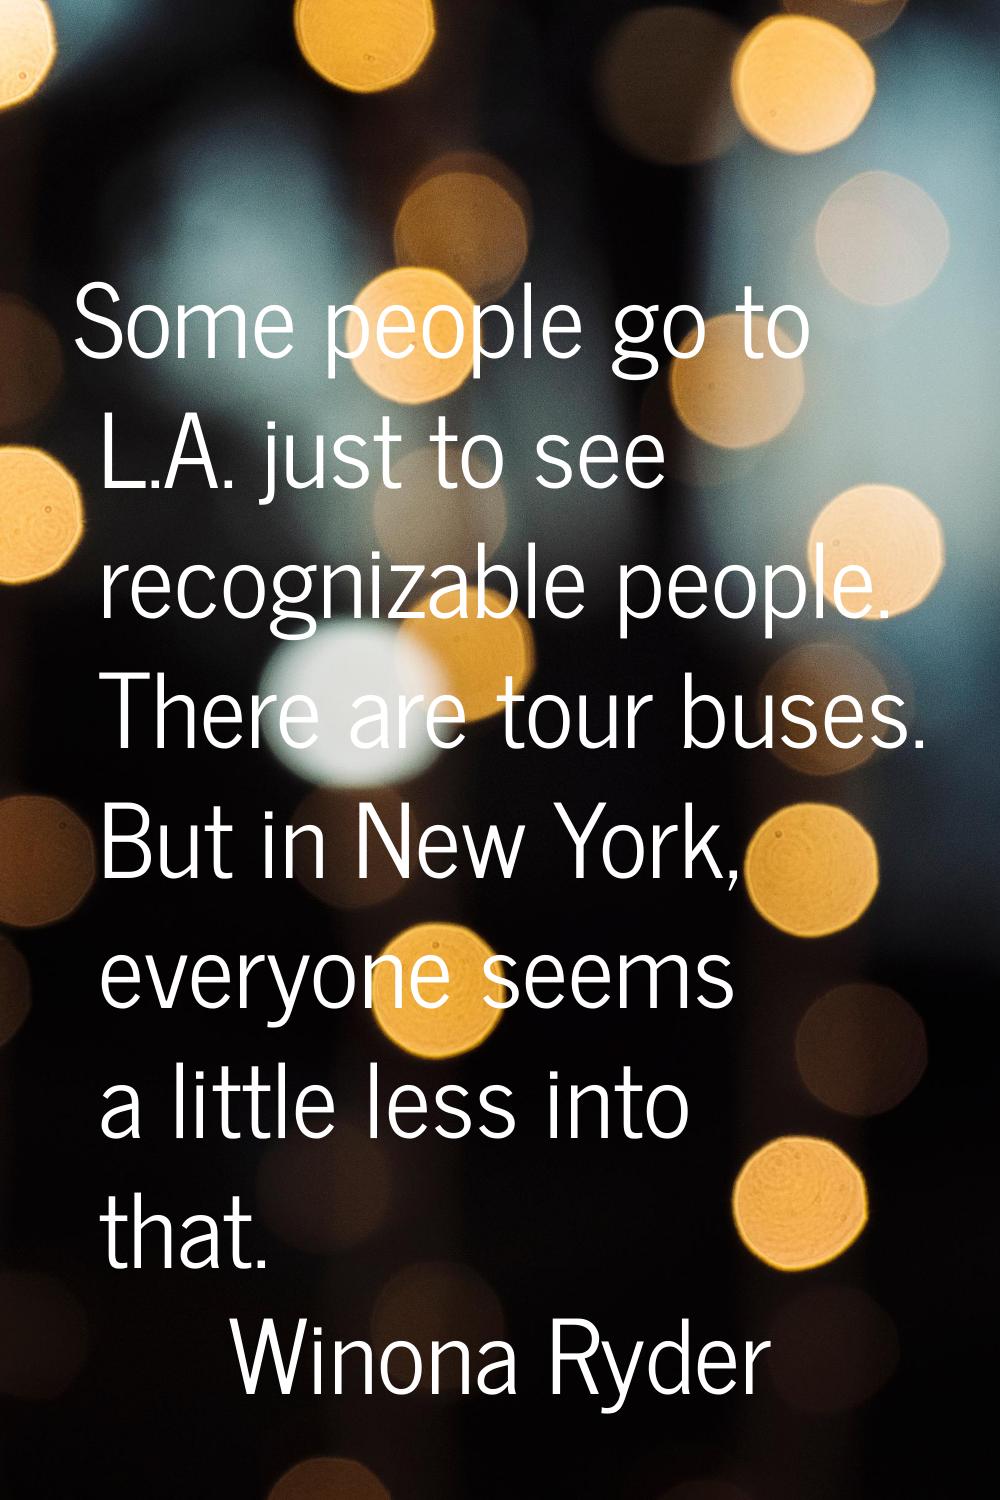 Some people go to L.A. just to see recognizable people. There are tour buses. But in New York, ever